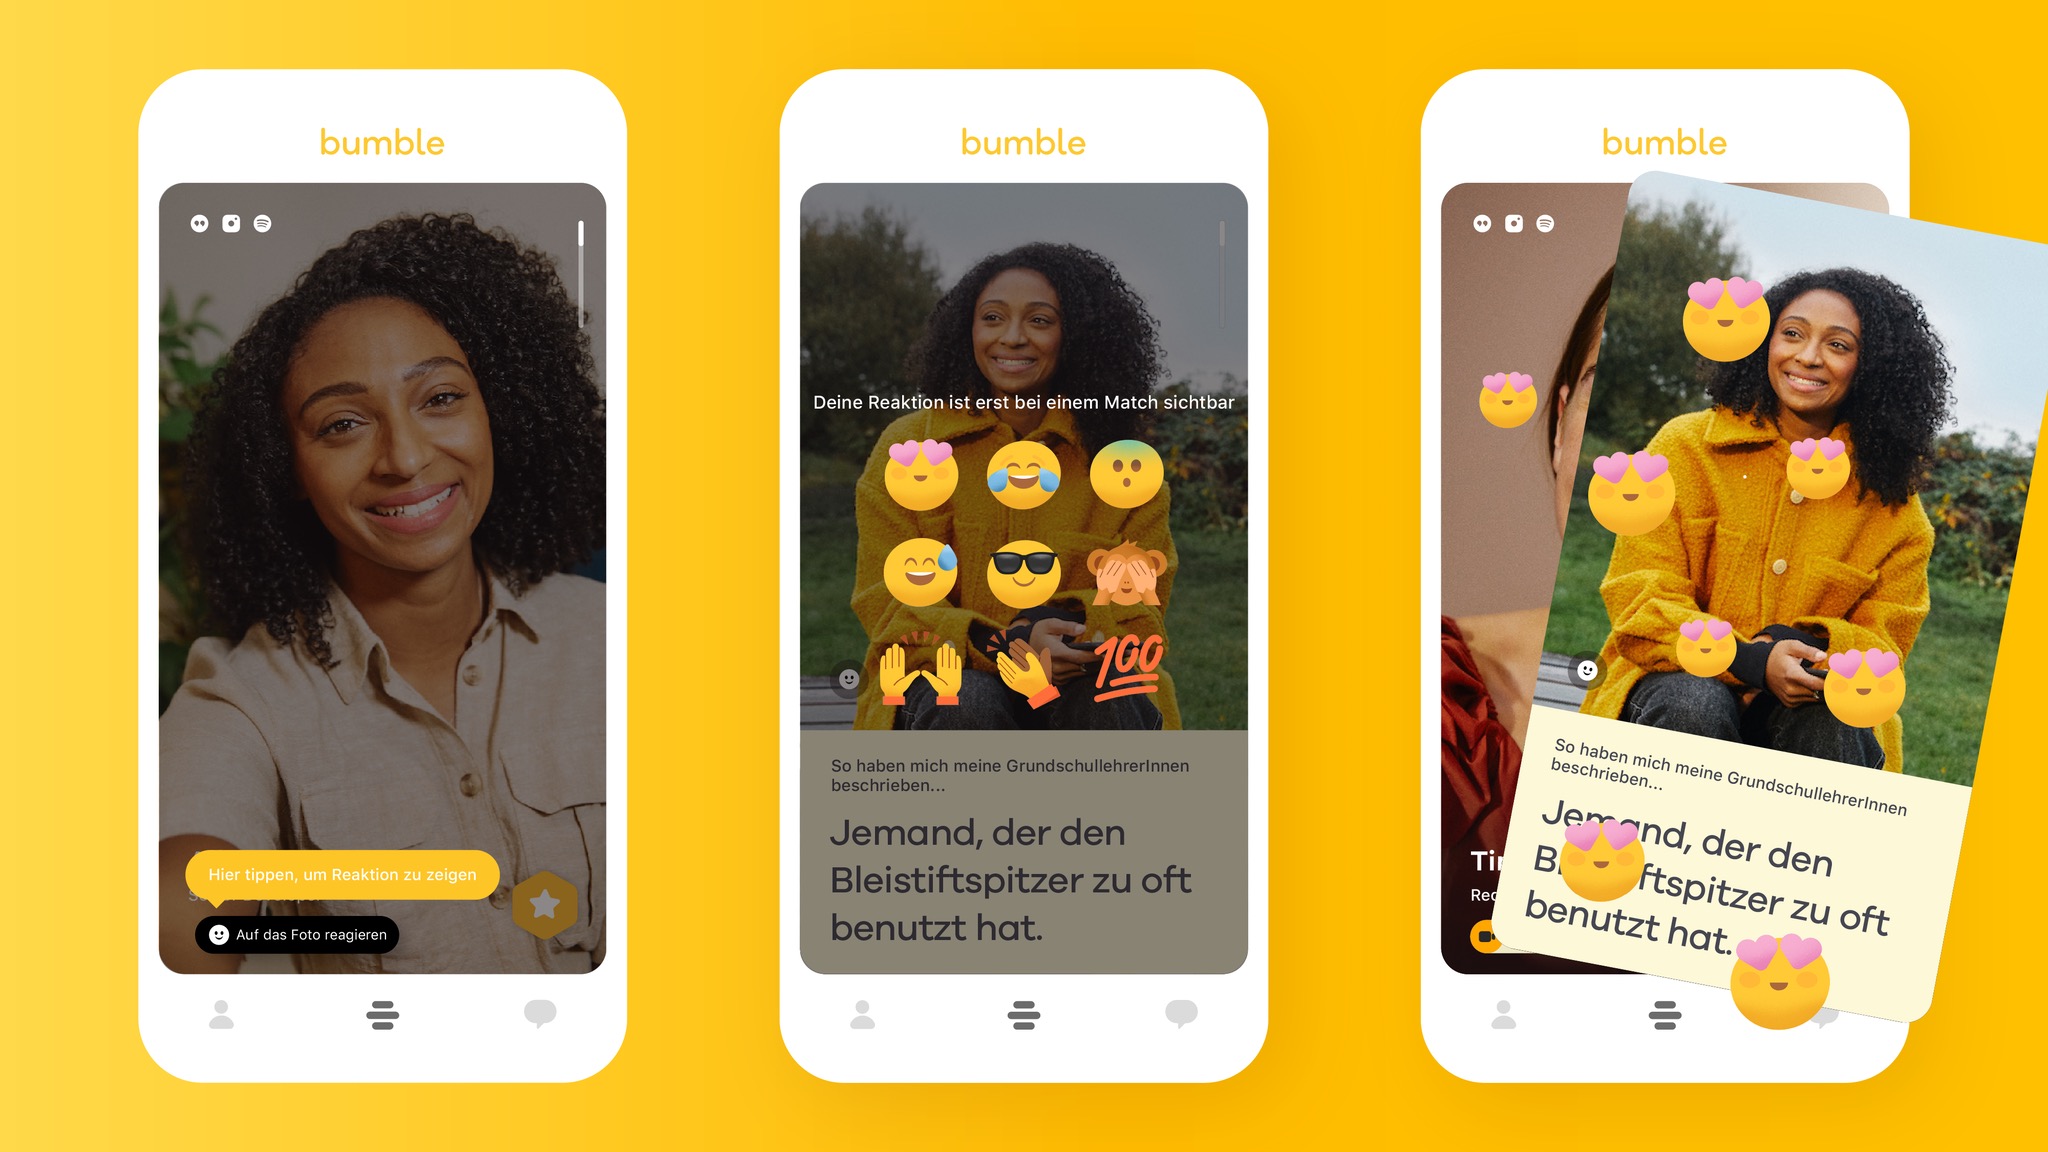 Bumble: This is where women take the first step - also with emojis